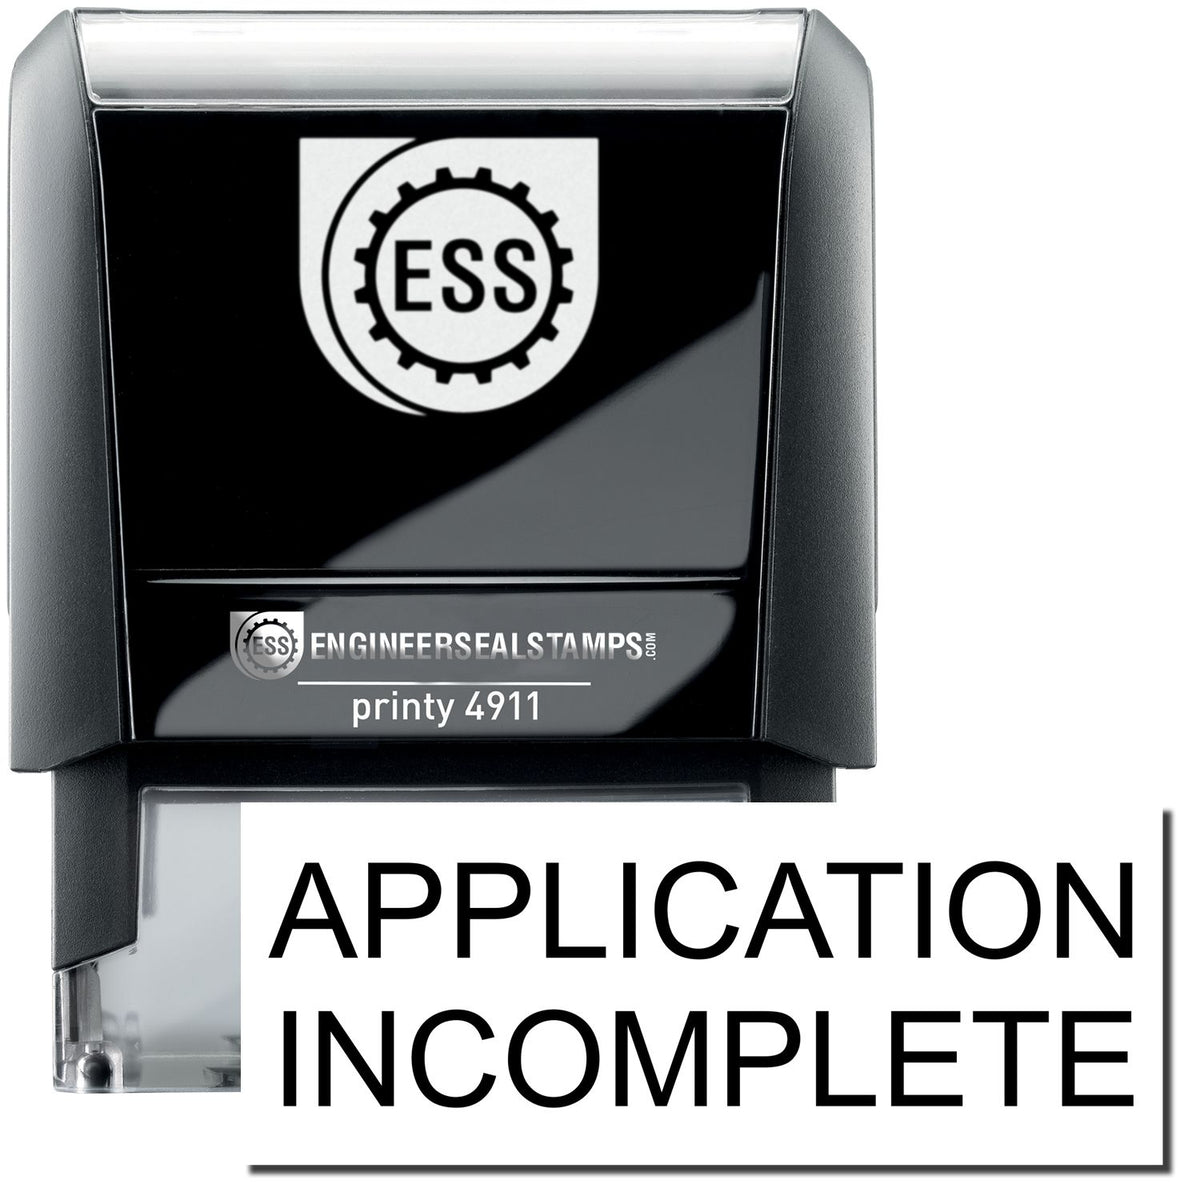 A self-inking stamp with a stamped image showing how the text &quot;APPLICATION INCOMPLETE&quot; is displayed after stamping.